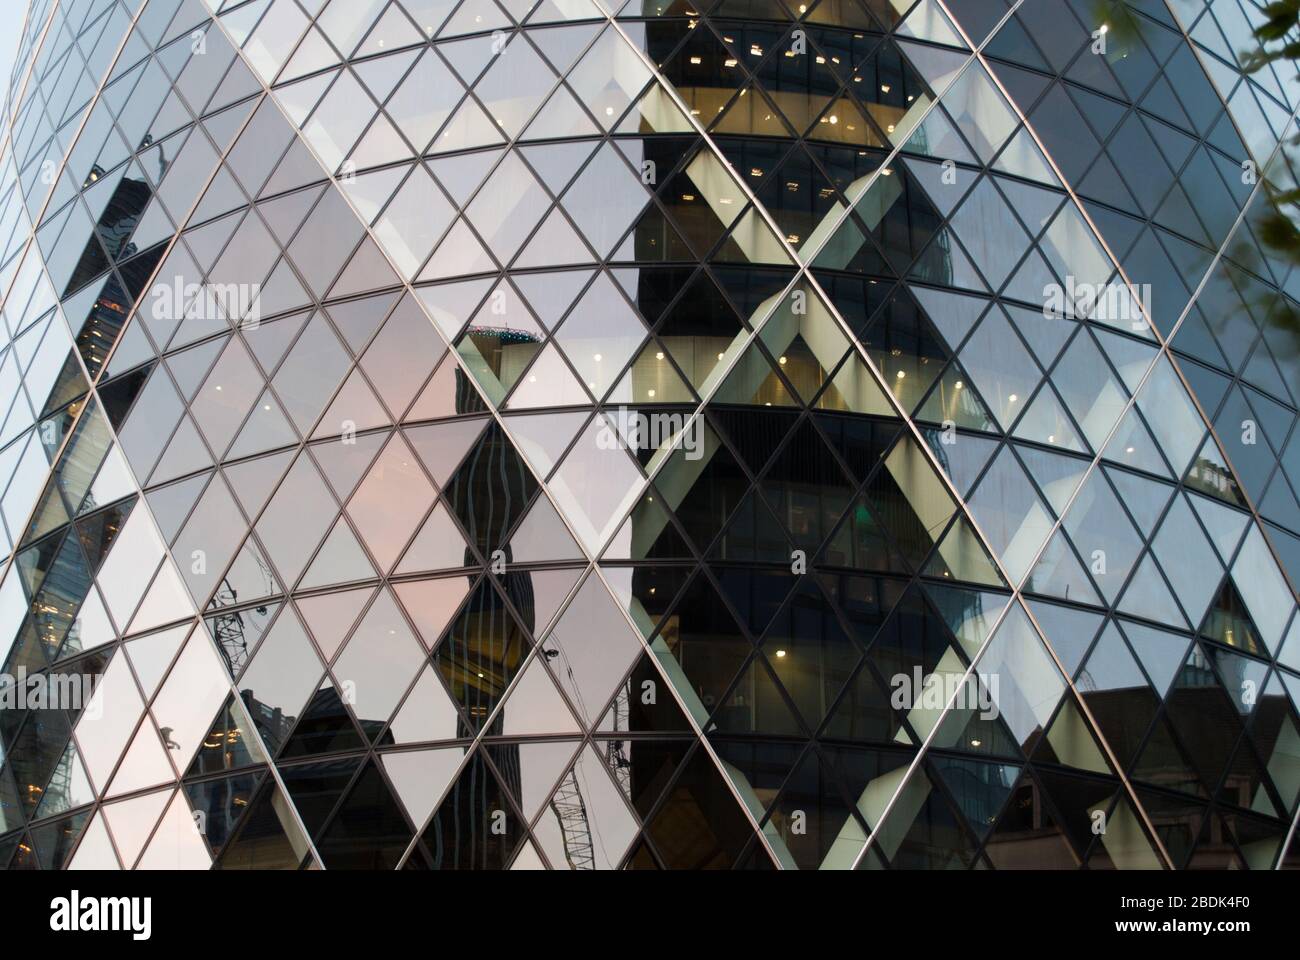 Blue Tower The Gherkin Swiss Re Building 30 St Mary Axe, London EC3A 8BF by Foster & Partners Stock Photo